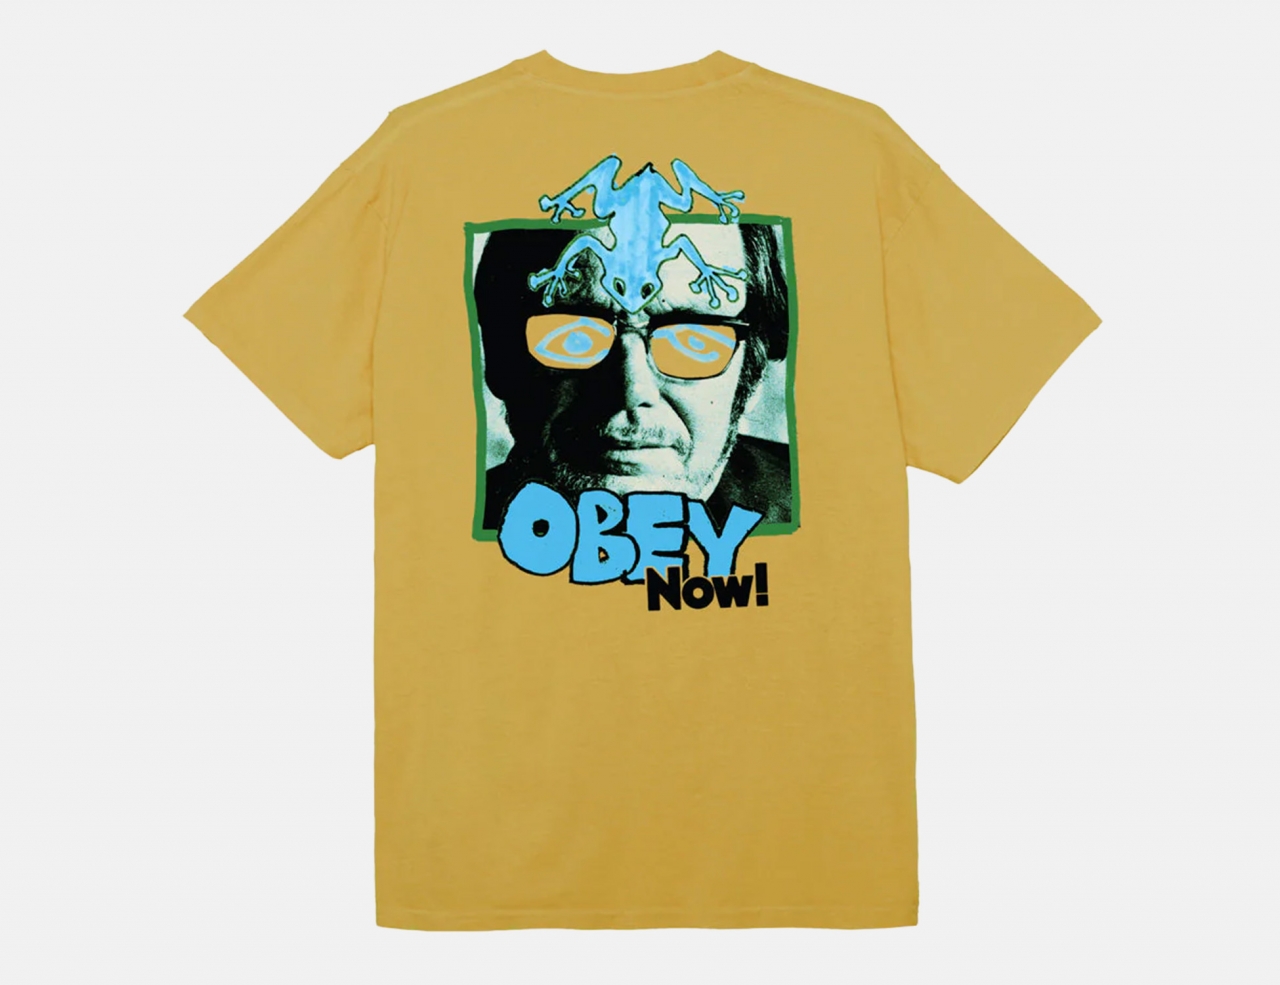 Obey NOW! T-Shirt - Pigment Sunflower